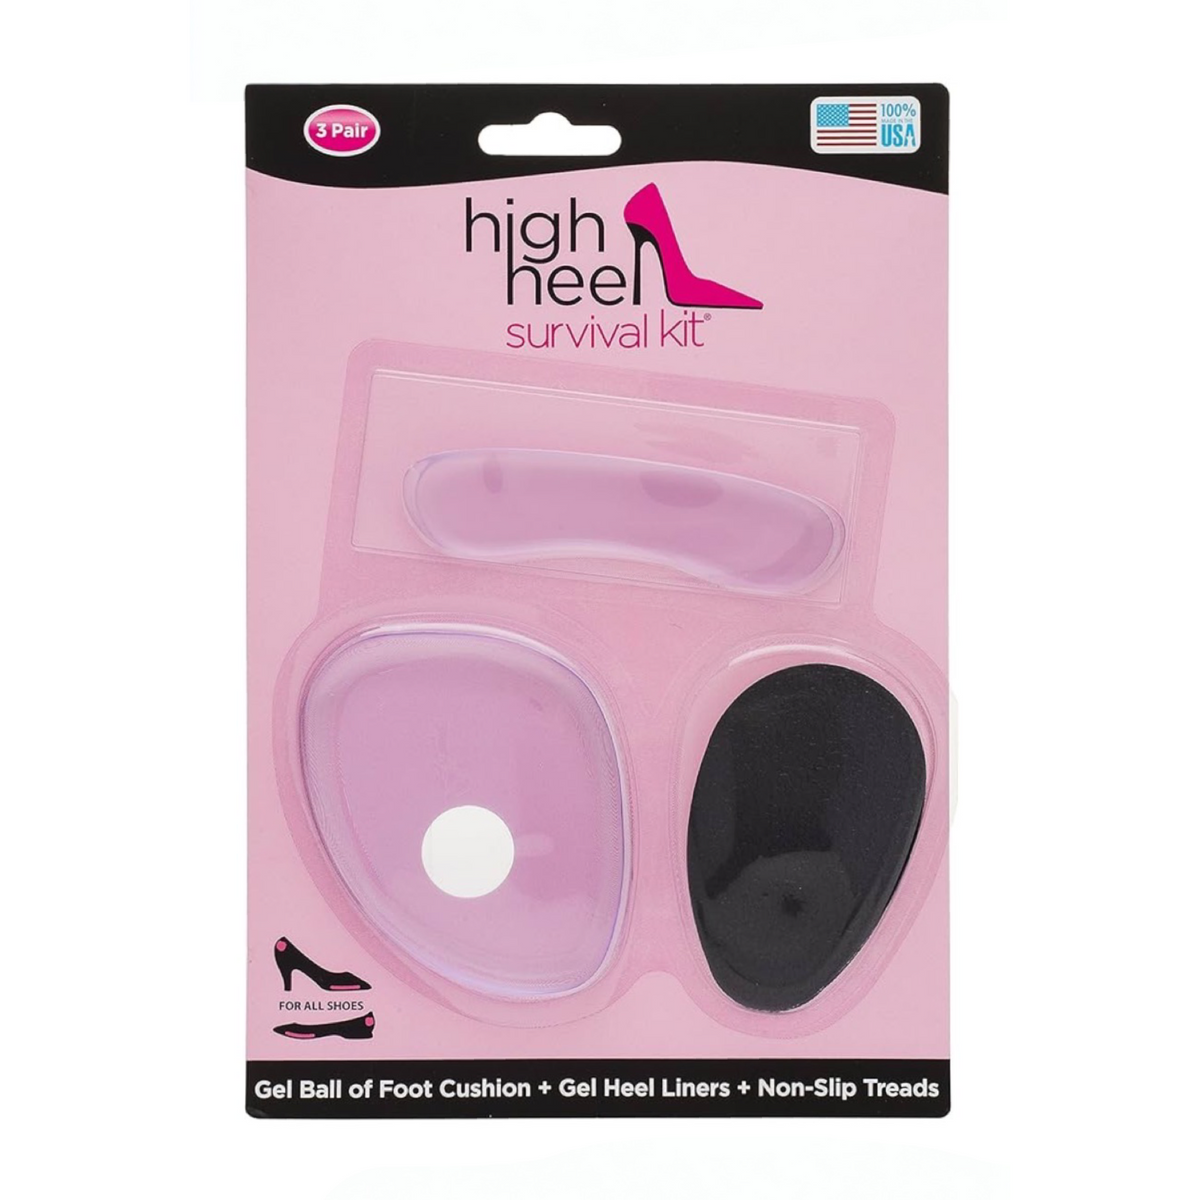 6pc High Heel Survival Gel Foot Kit  - With Cushions, Liners & Grippers